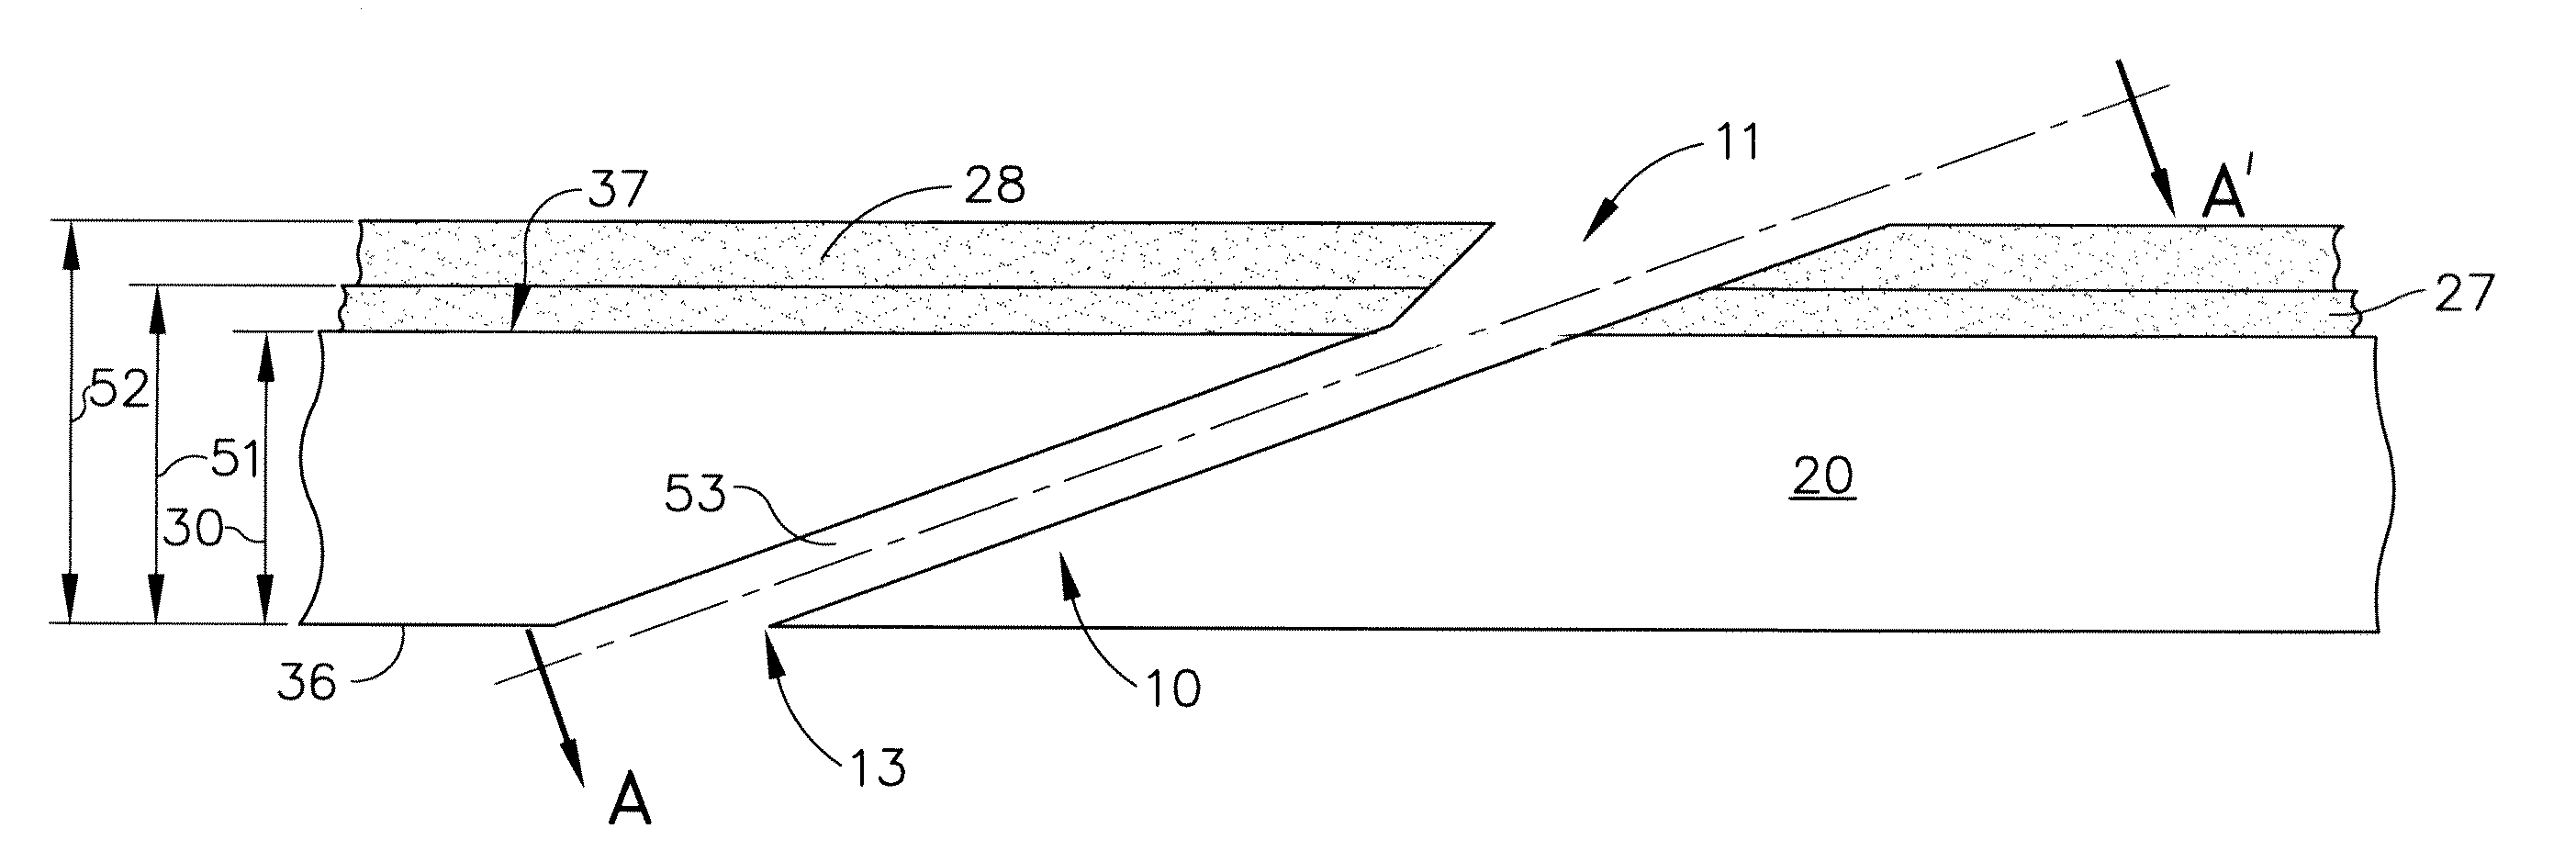 Substrate with shaped cooling holes and methods of manufacture